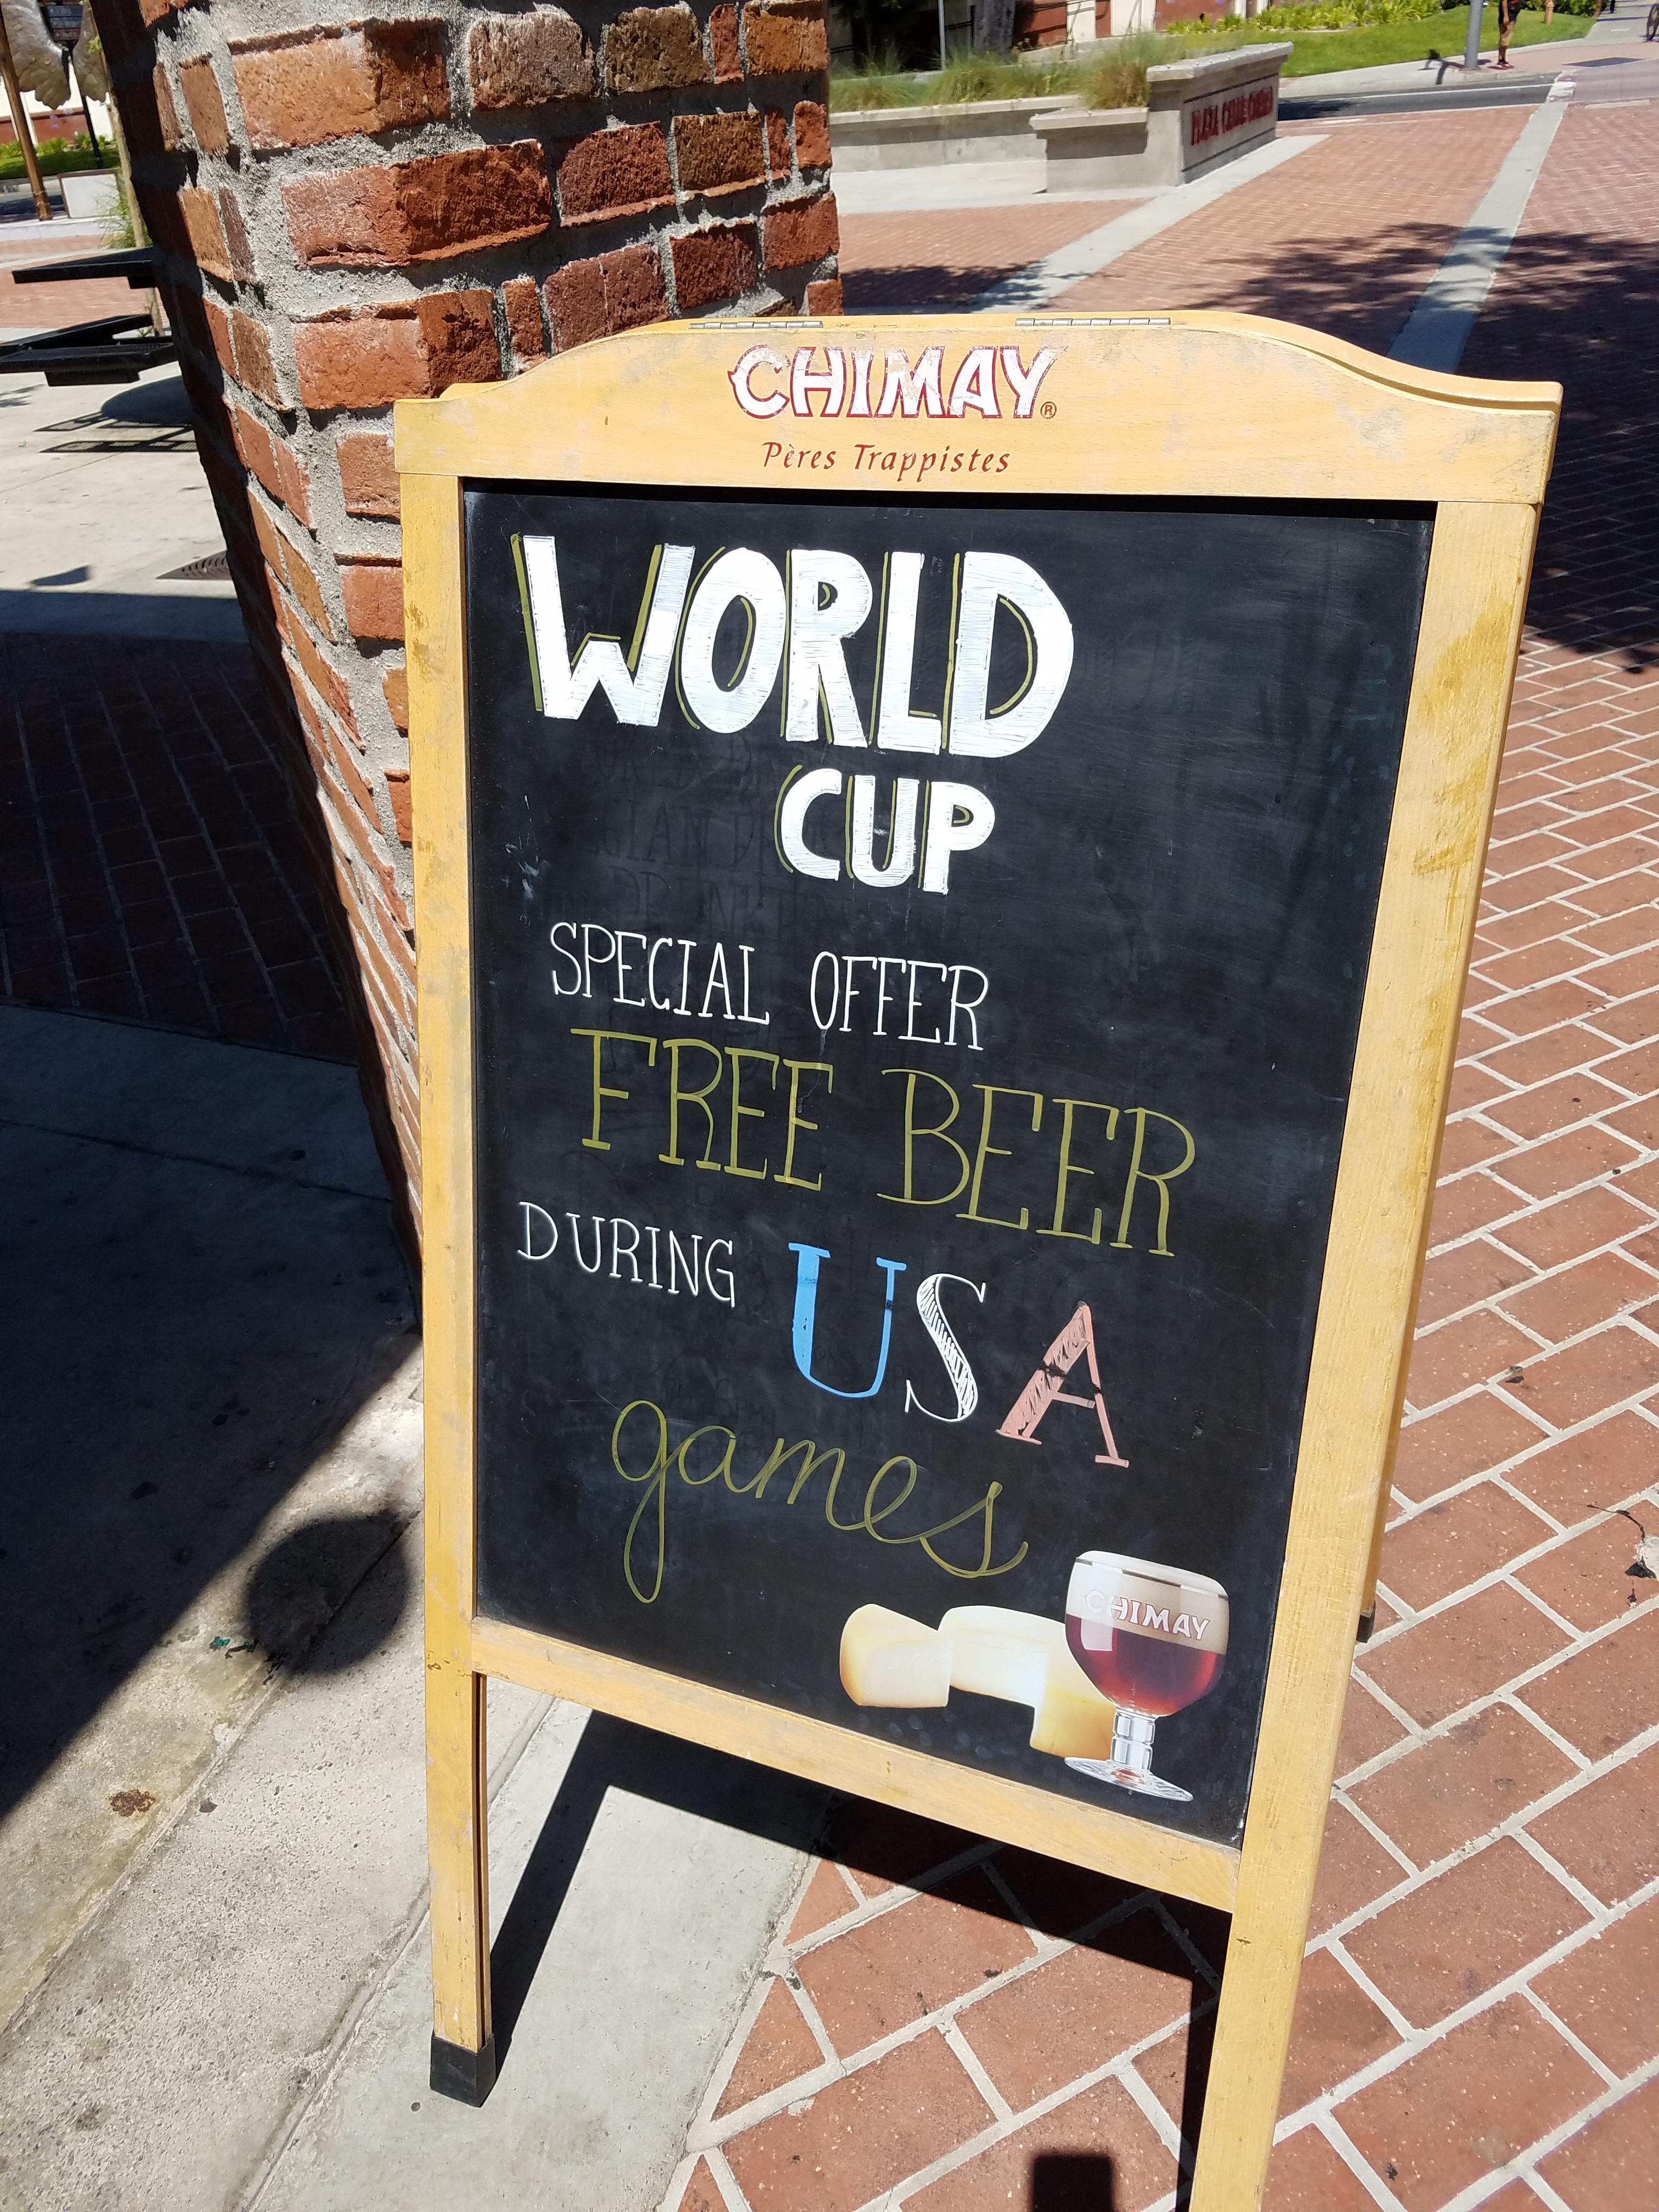 table - Chimay Per uns World Cup Special Offer Free Beer During Usa games